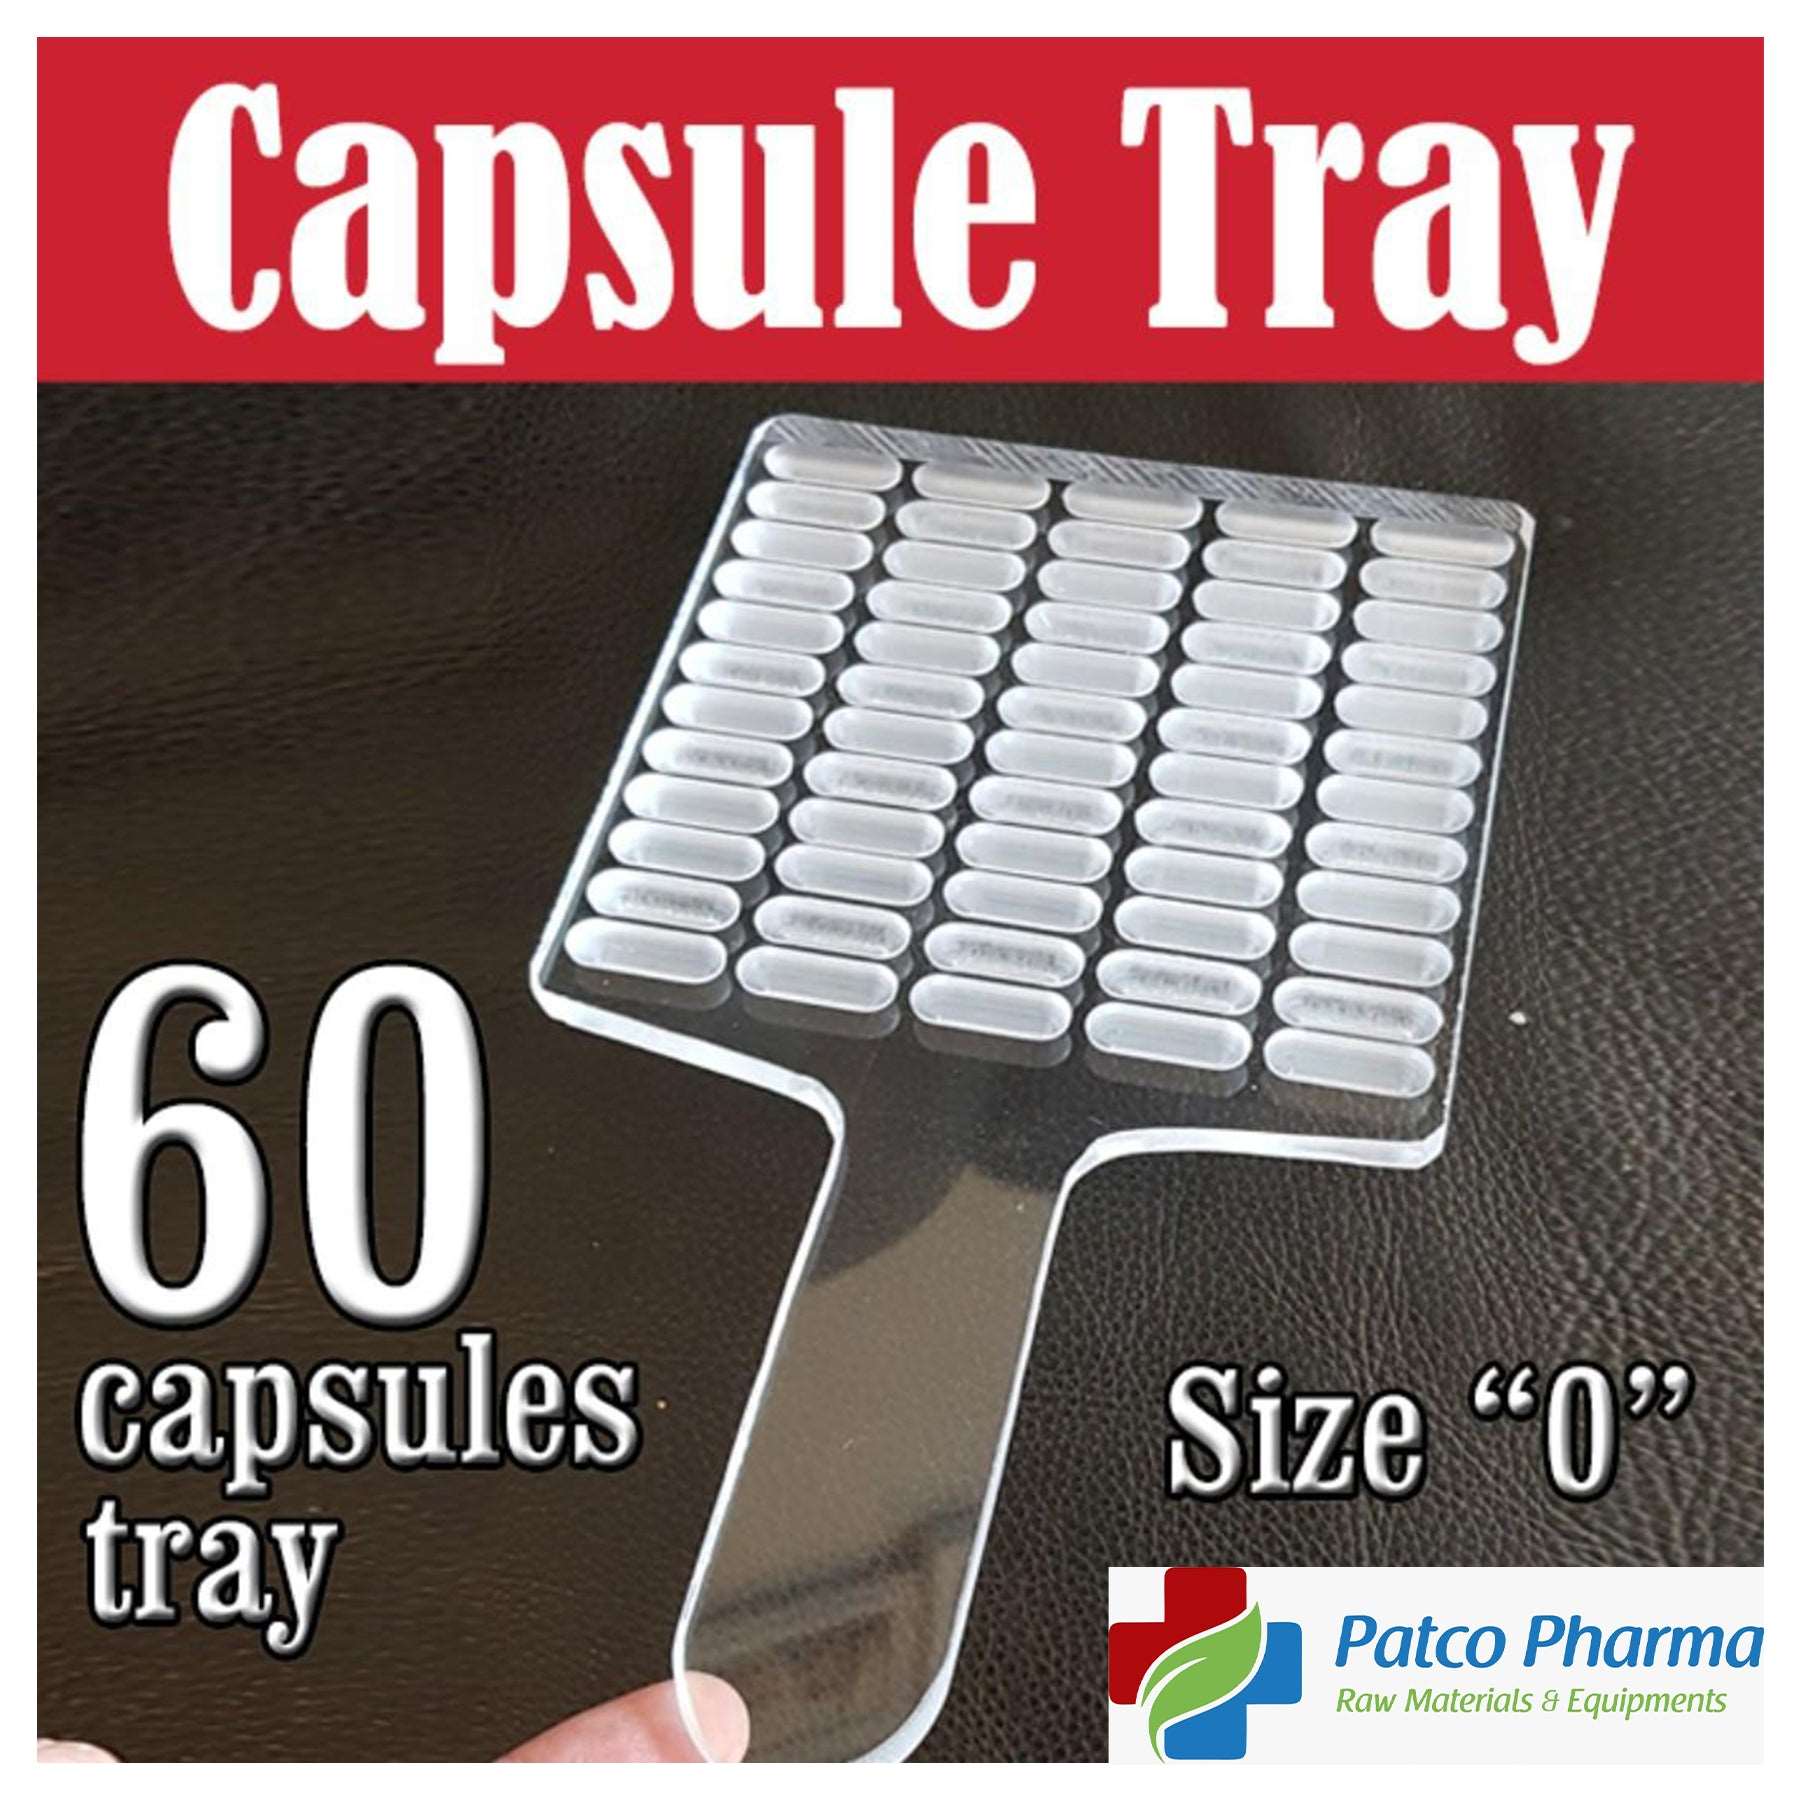 Manual Capsule Counter Count Board/Tray For Size 0 (60 Holes Capsule Counter), Patco Pharma, Capsule Filling Machines & Tools, manual-capsule-counter-count-board-tray-for-size-0-60-holes-capsule-counter, 60 holes capsule counter, capsule counter, size 0 capsule, Patco Pharma